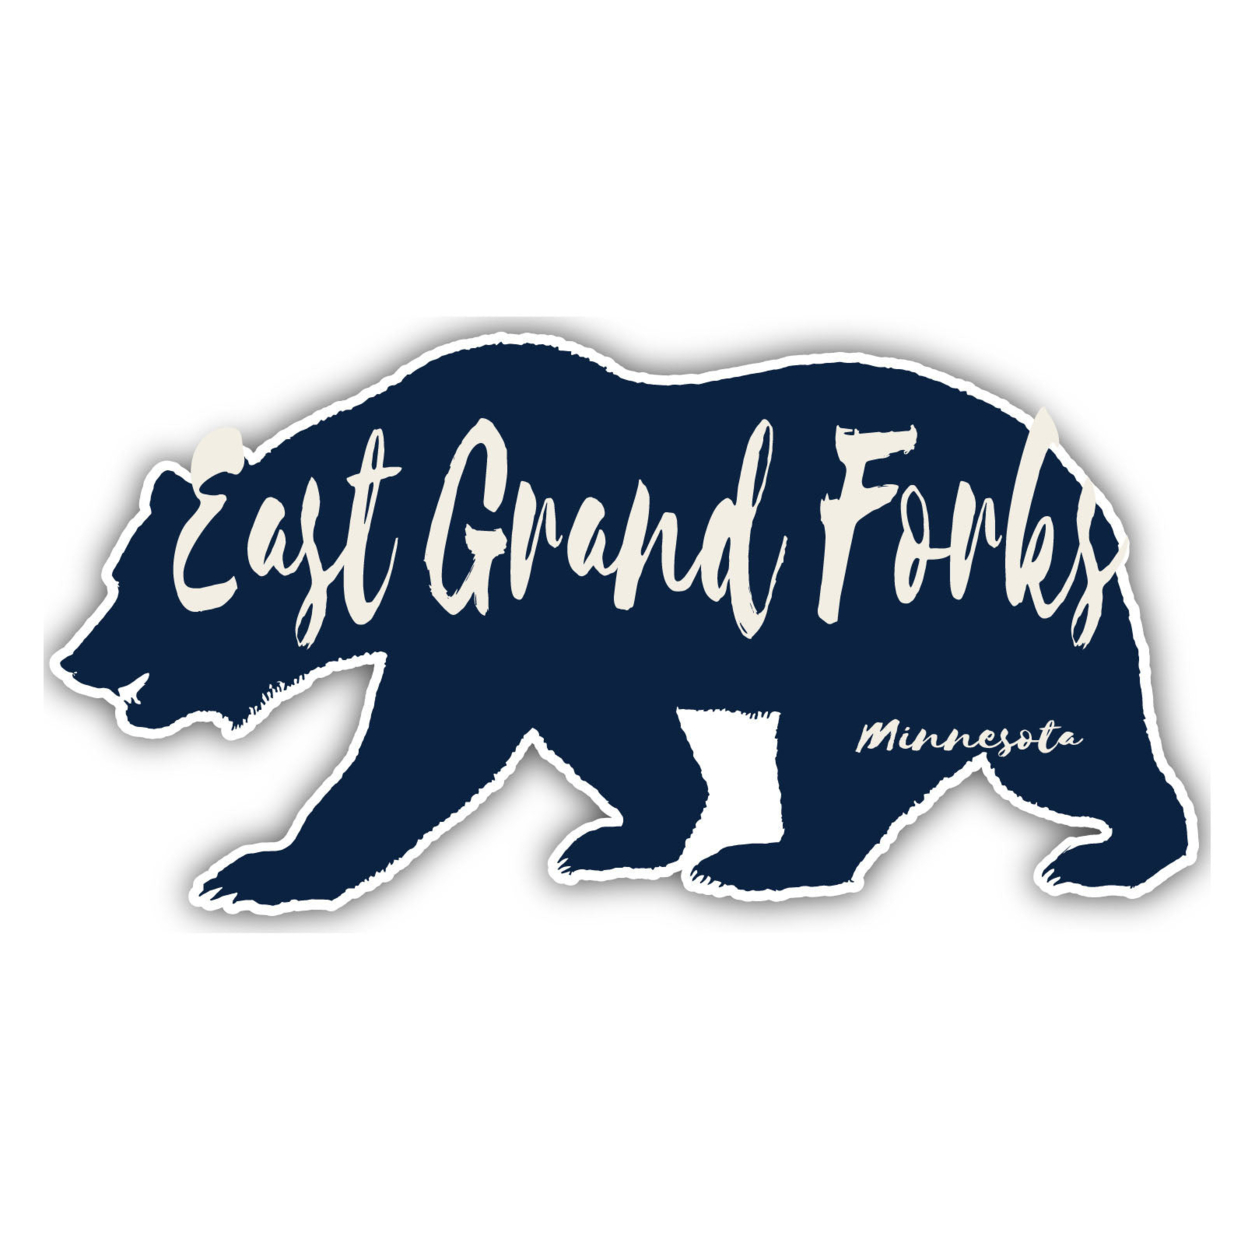 East Grand Forks Minnesota Souvenir Decorative Stickers (Choose Theme And Size) - 4-Pack, 8-Inch, Camp Life